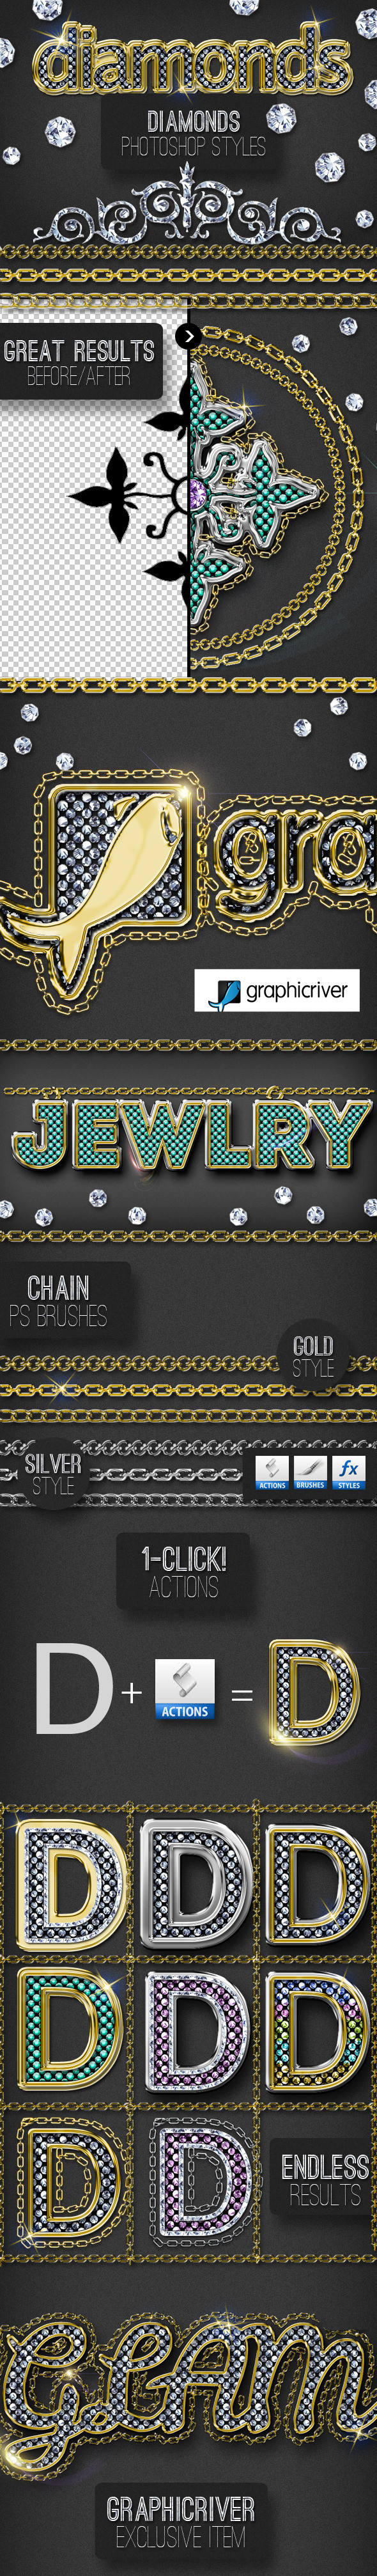 01 main preview bling bling diamonds style photoshop actions